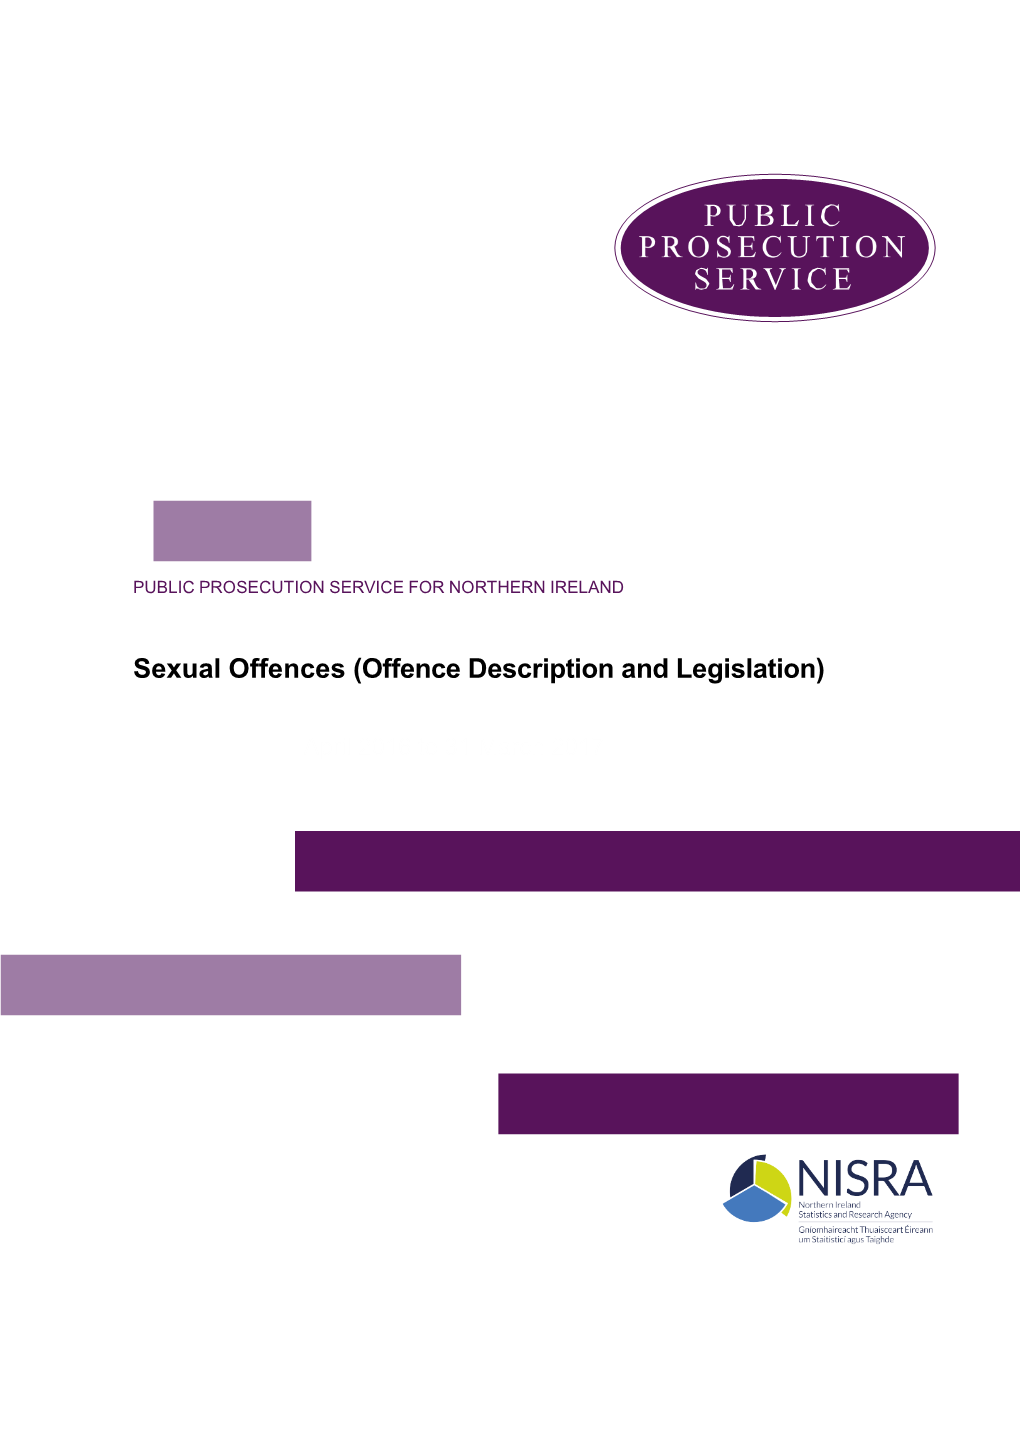 Sexual Offences Offence Description and Legislation